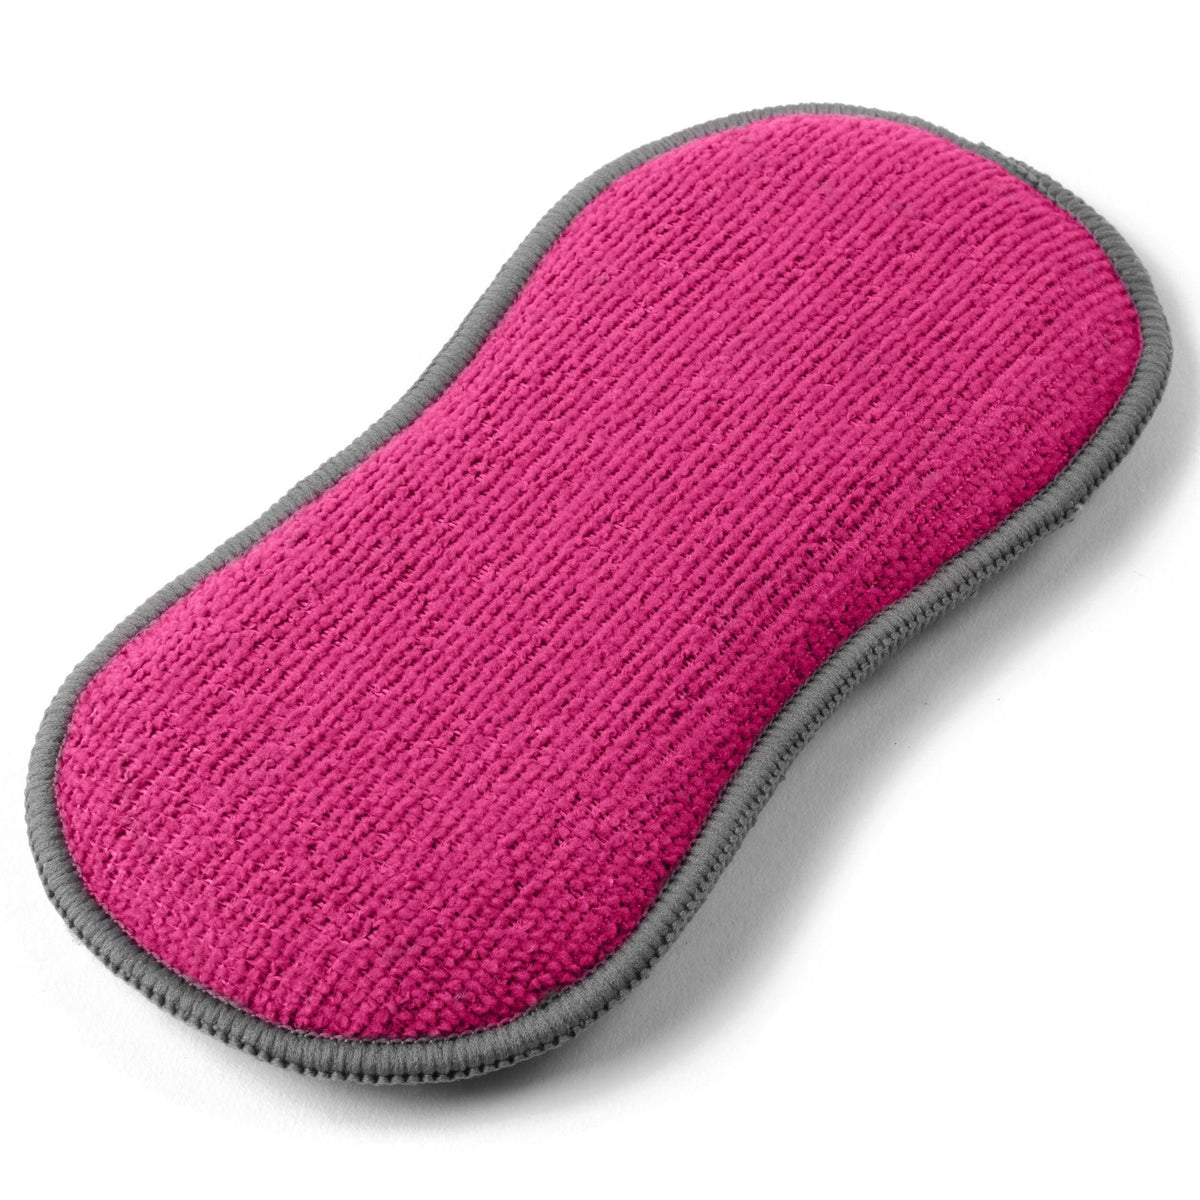 Kleeneze Scrub &amp; Shine Double Sided Microfibre Cleaning Pads | 3 Pack - Choice Stores